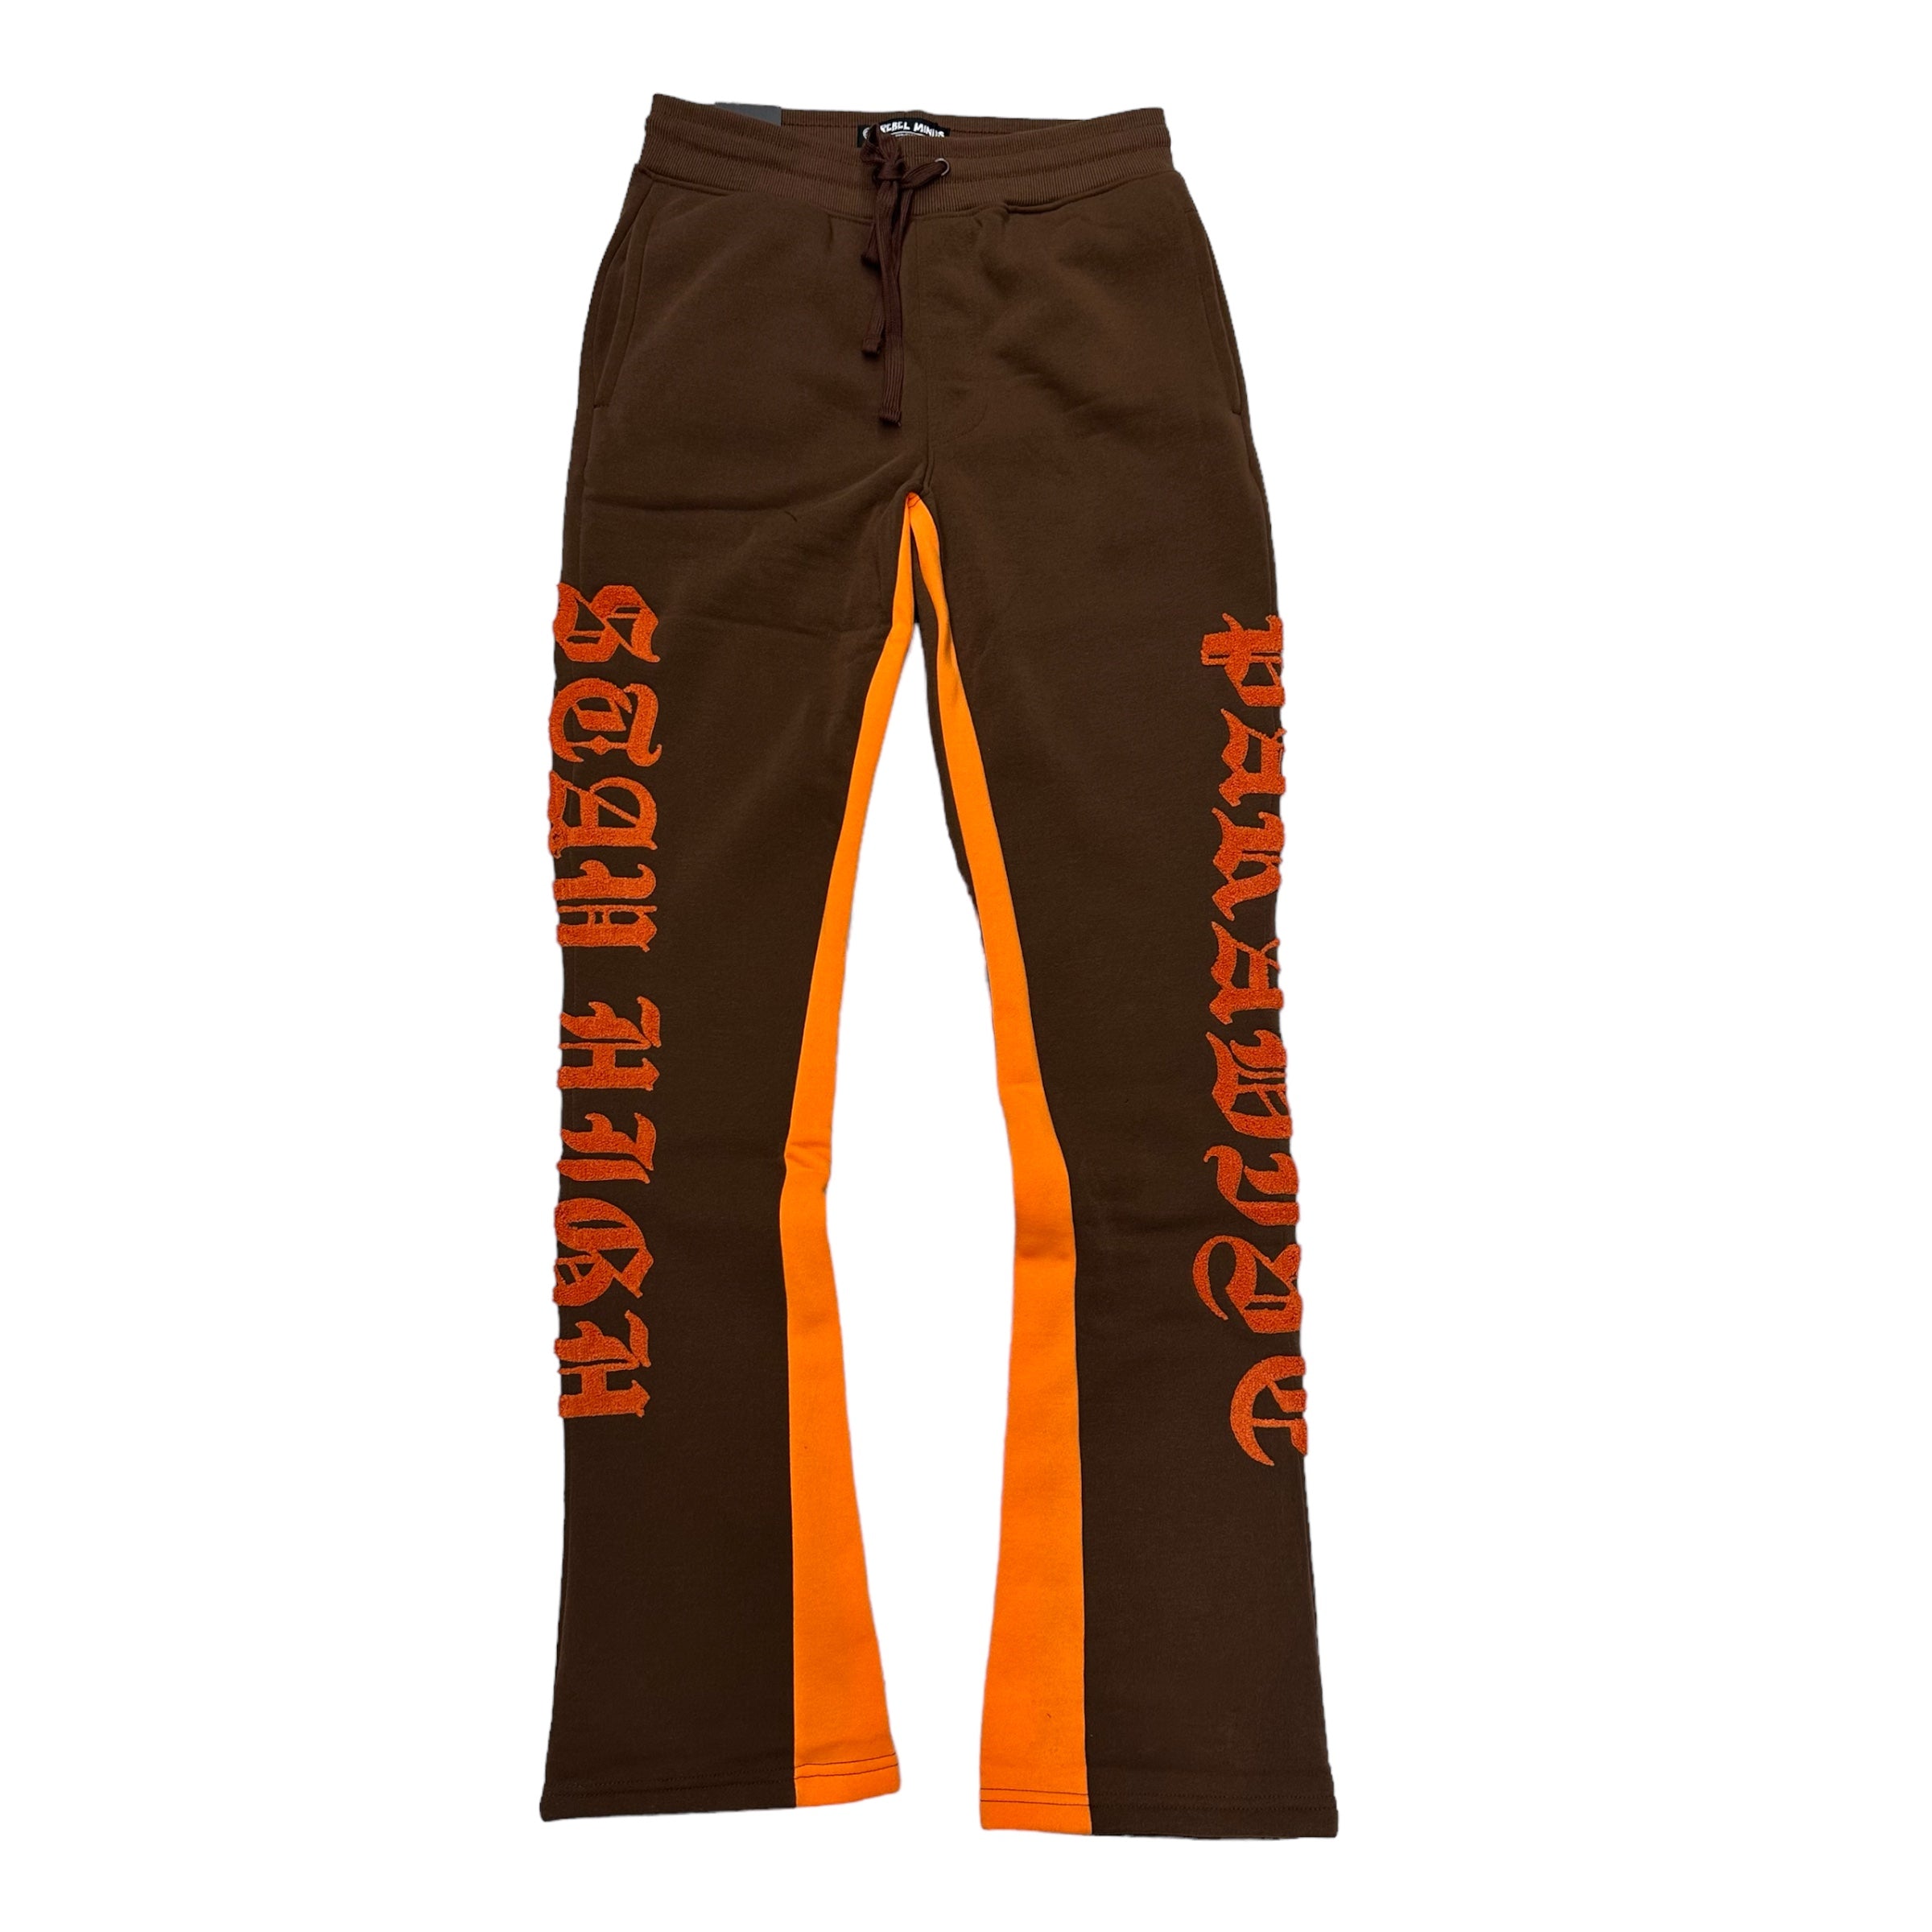 Rebel stay high Stacked Sweat Pants Brown 498